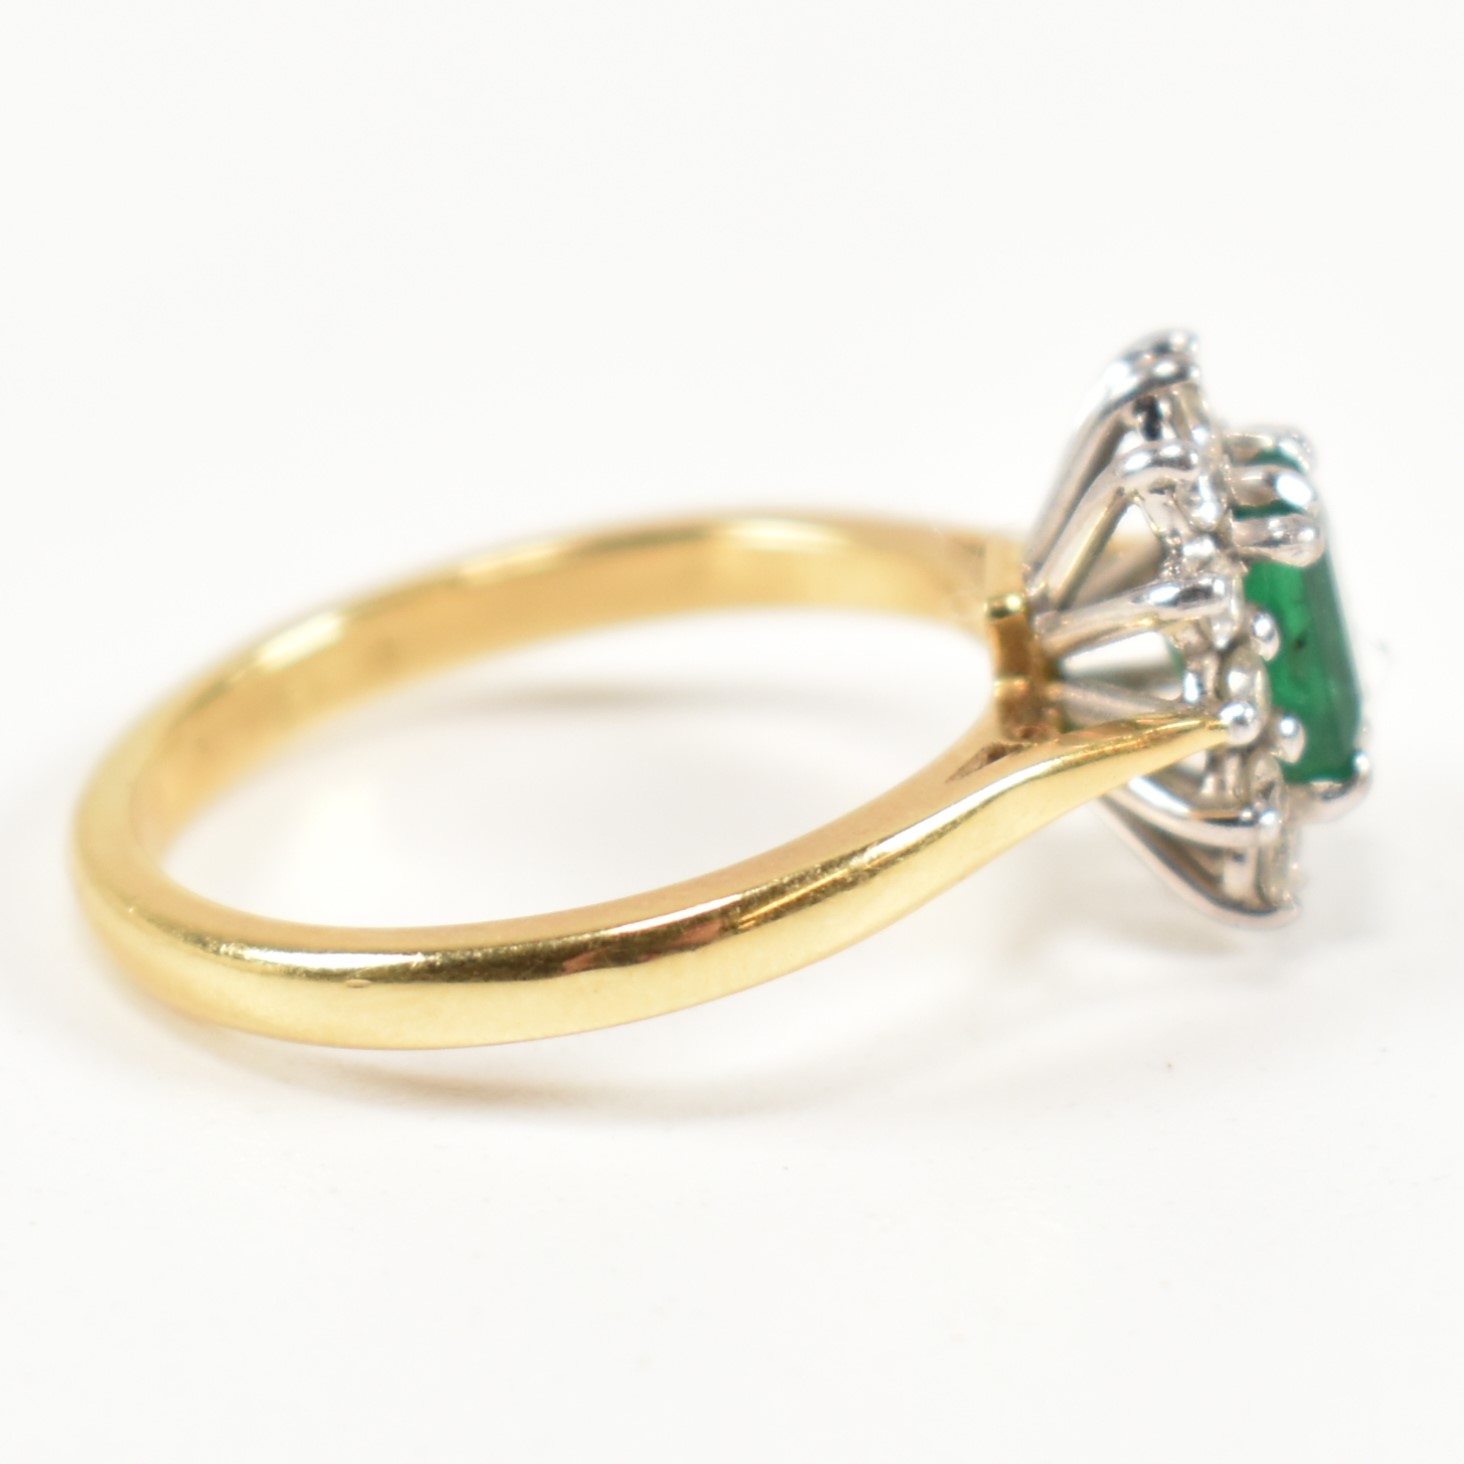 HALLMARKED 18CT GOLD EMERALD & DIAMOND CLUSTER RING - Image 4 of 9